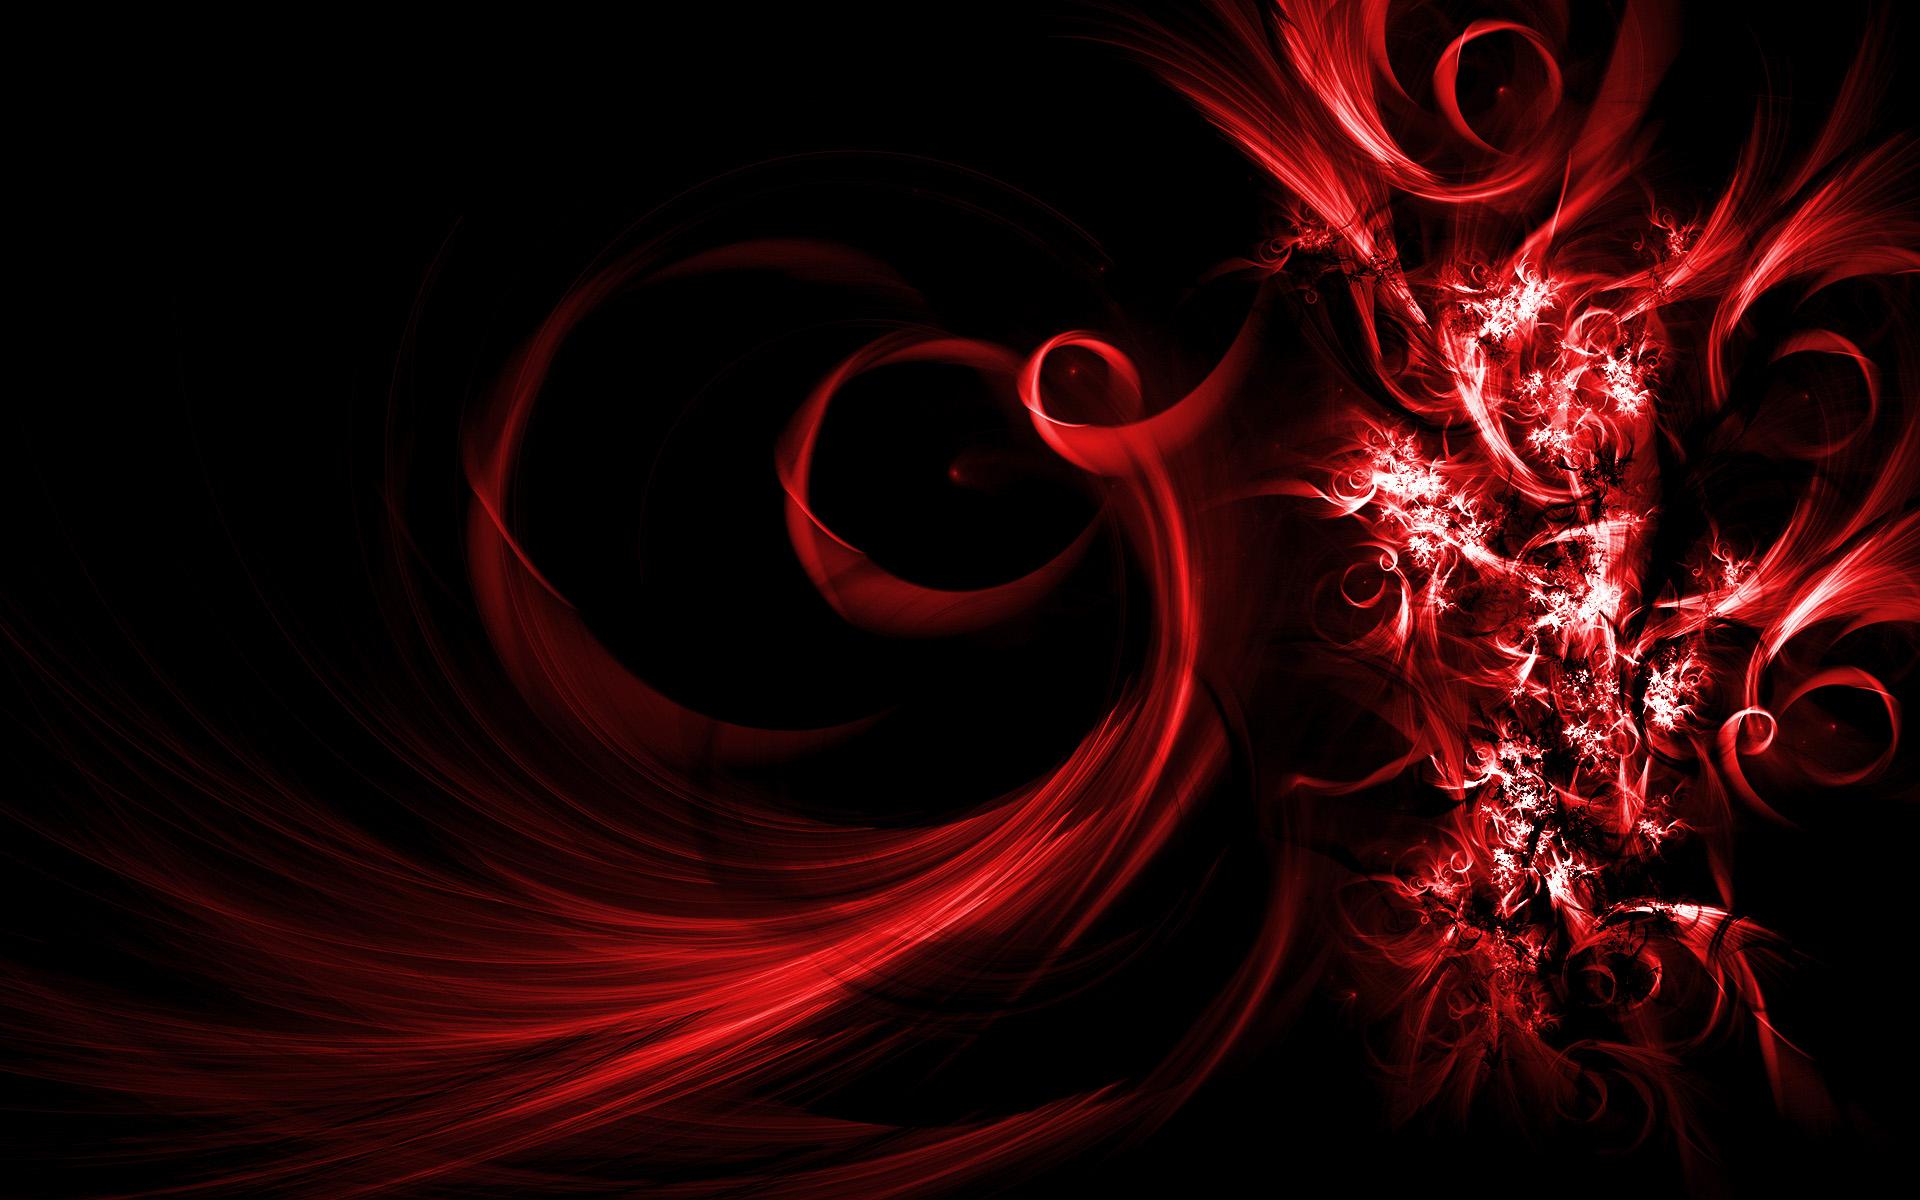 Red Wallpaper Photos, Download The BEST Free Red Wallpaper Stock